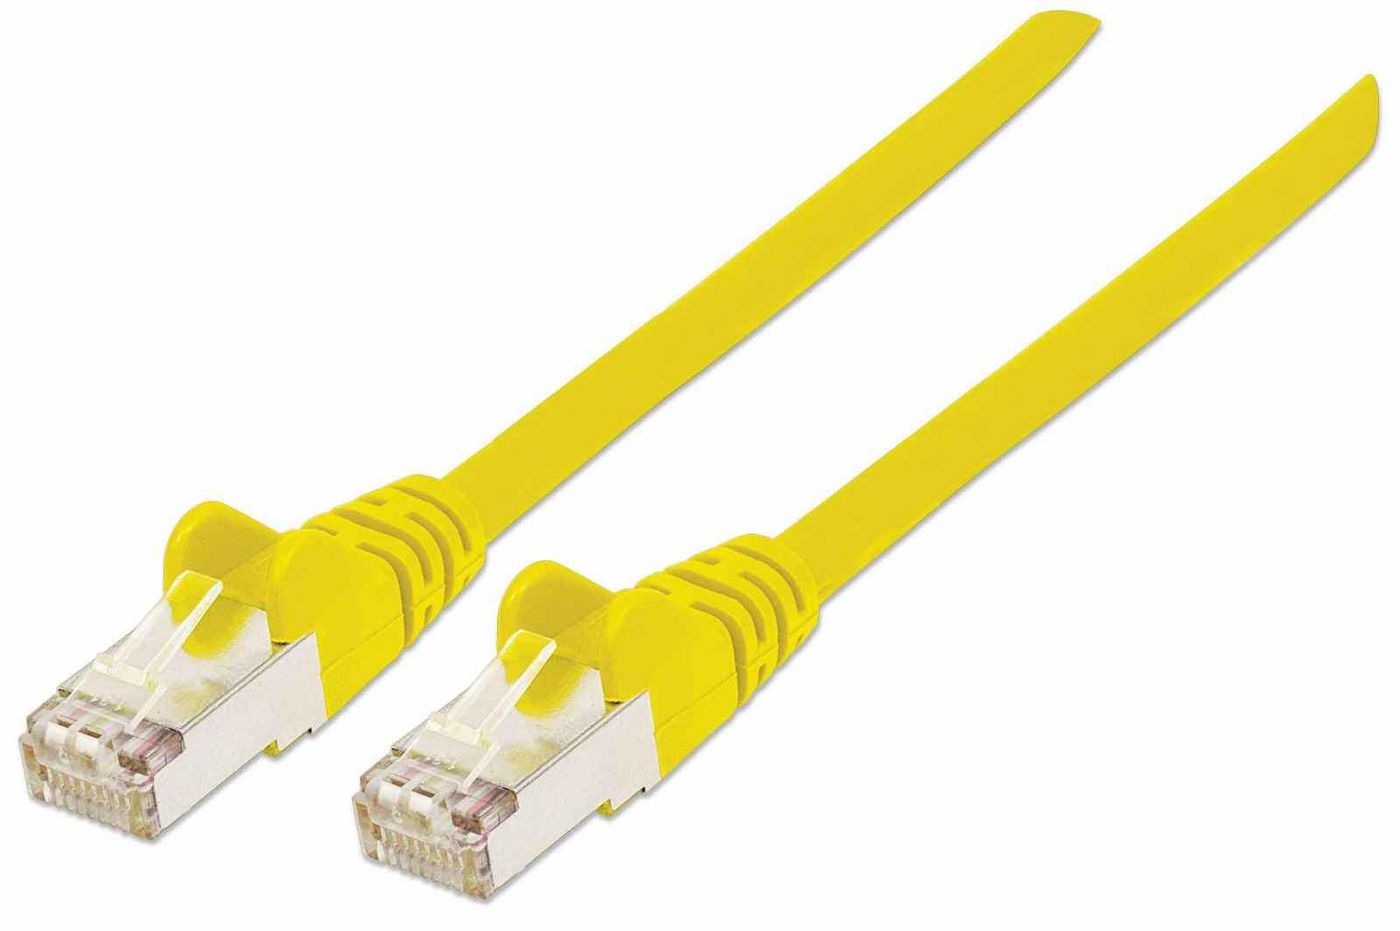 Intellinet 740647 High Performance Network Cable 